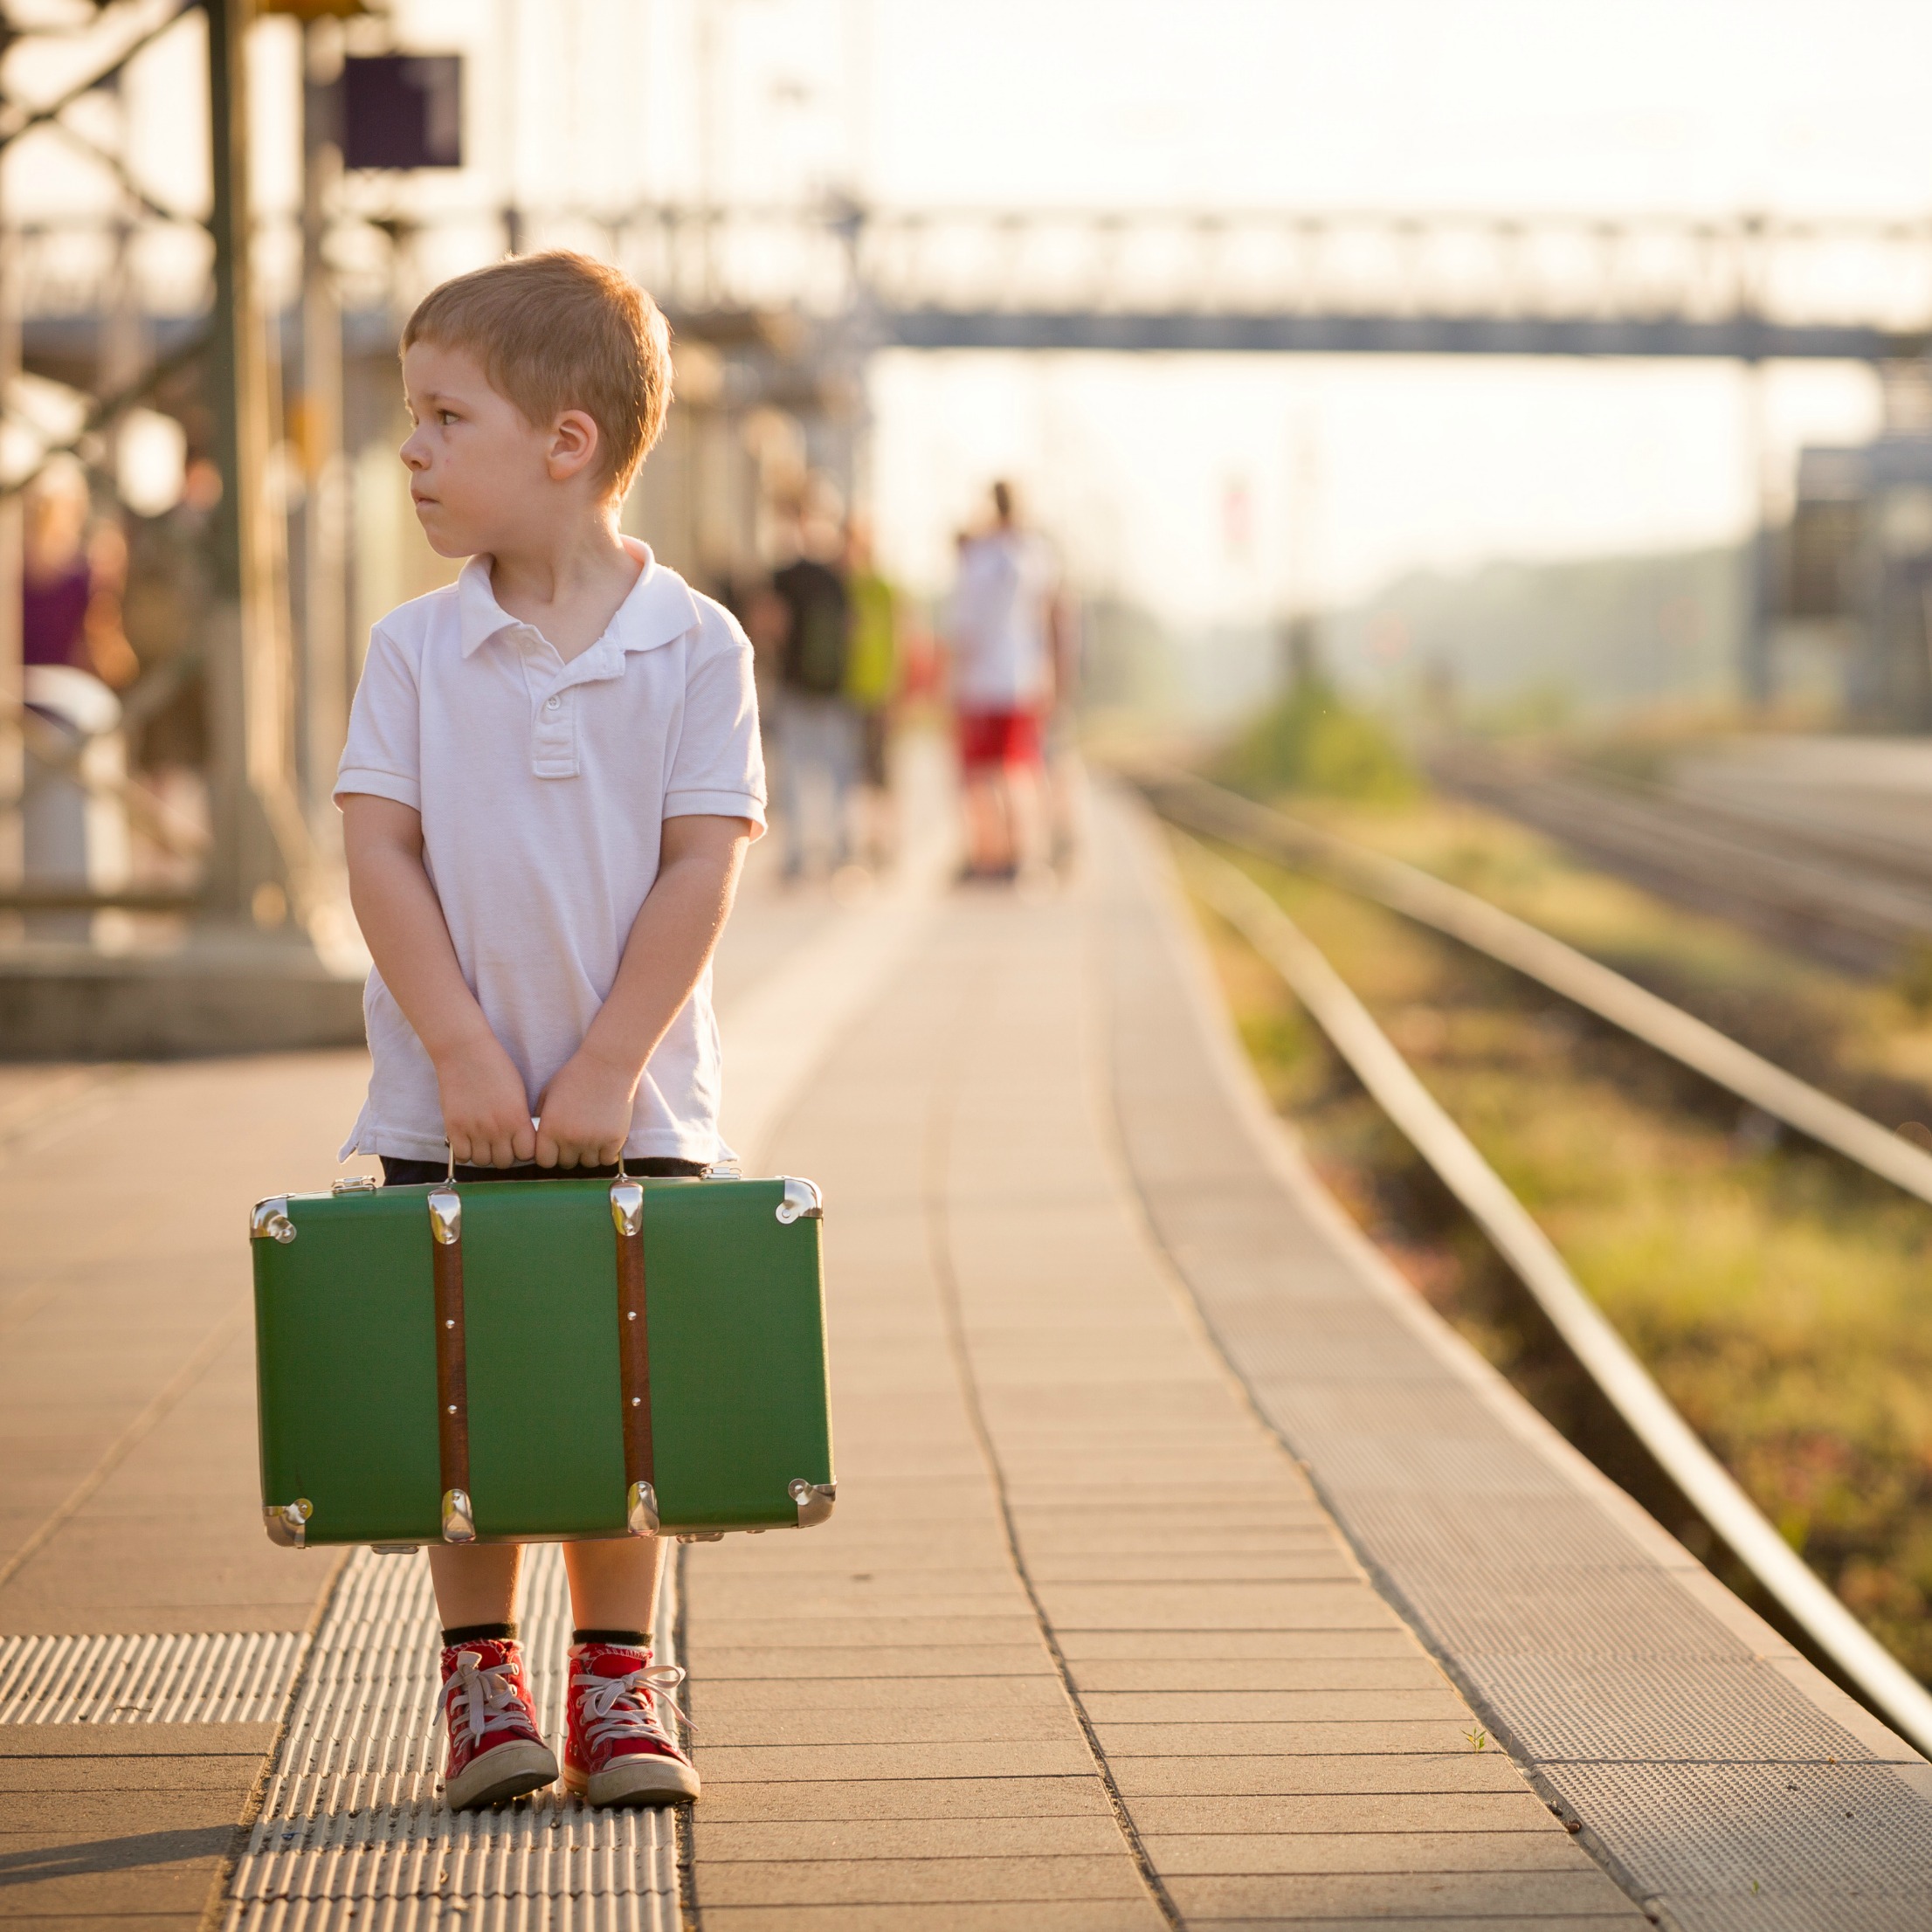 The Train Analogy That Will Completely Change How You See Your Crying Child